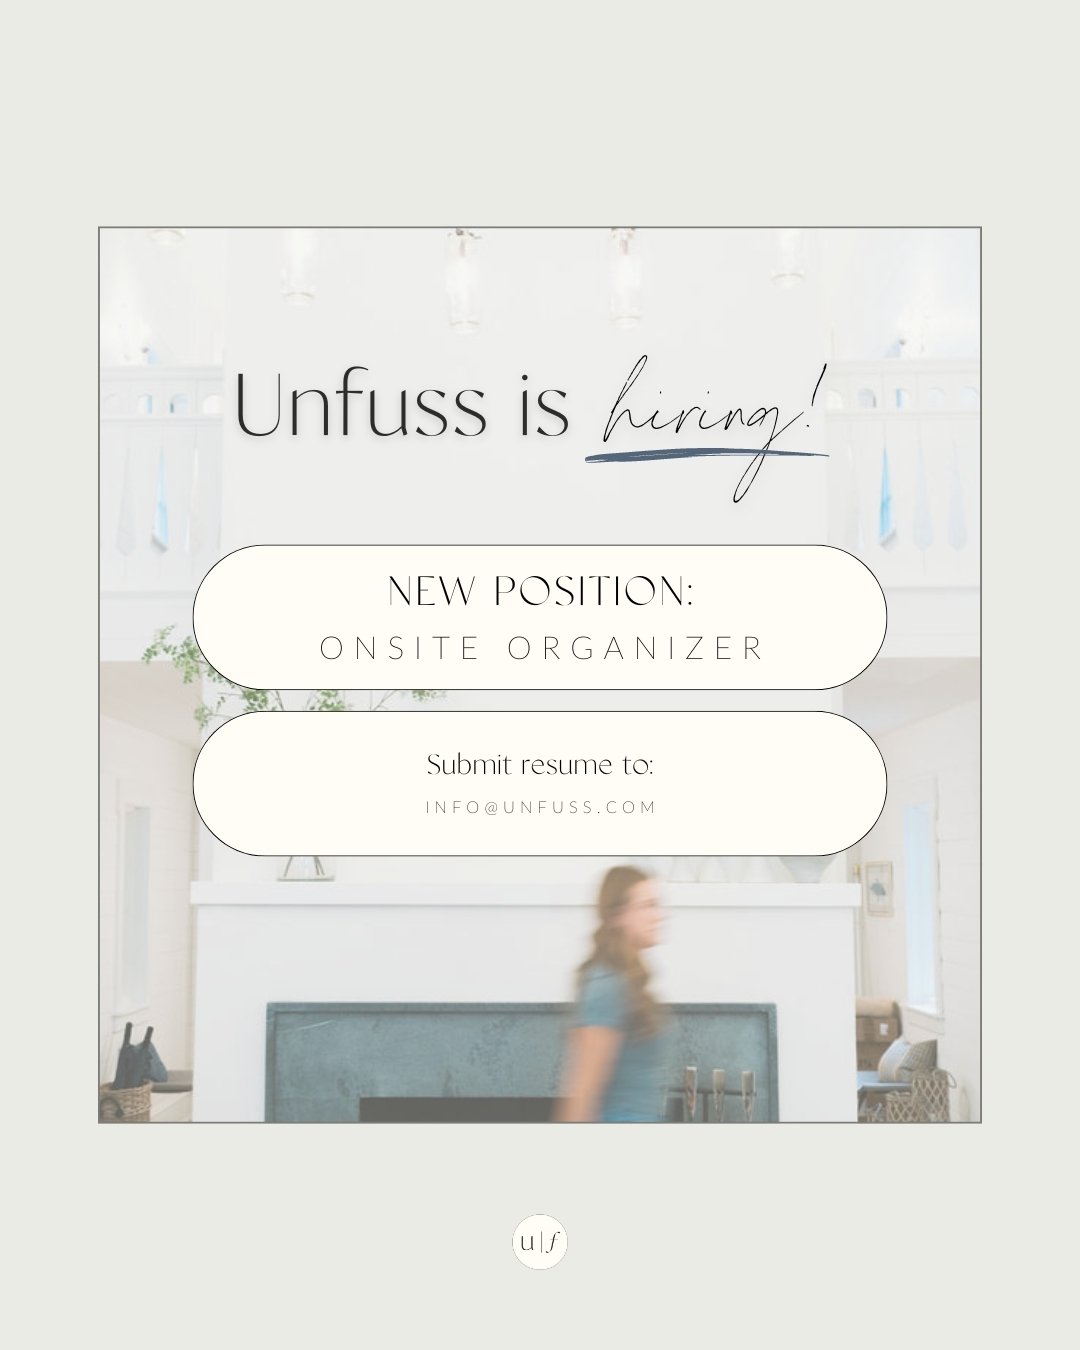 💥 UNFUSS IS NOW HIRING 💥 ⁣

Unfuss is expanding and looking for amazing people to join our team!

We are looking for hardworking, enthusiastic team members to join us as a part-time Onsite Organizer. The role of Onsite Organizer is to support Carol